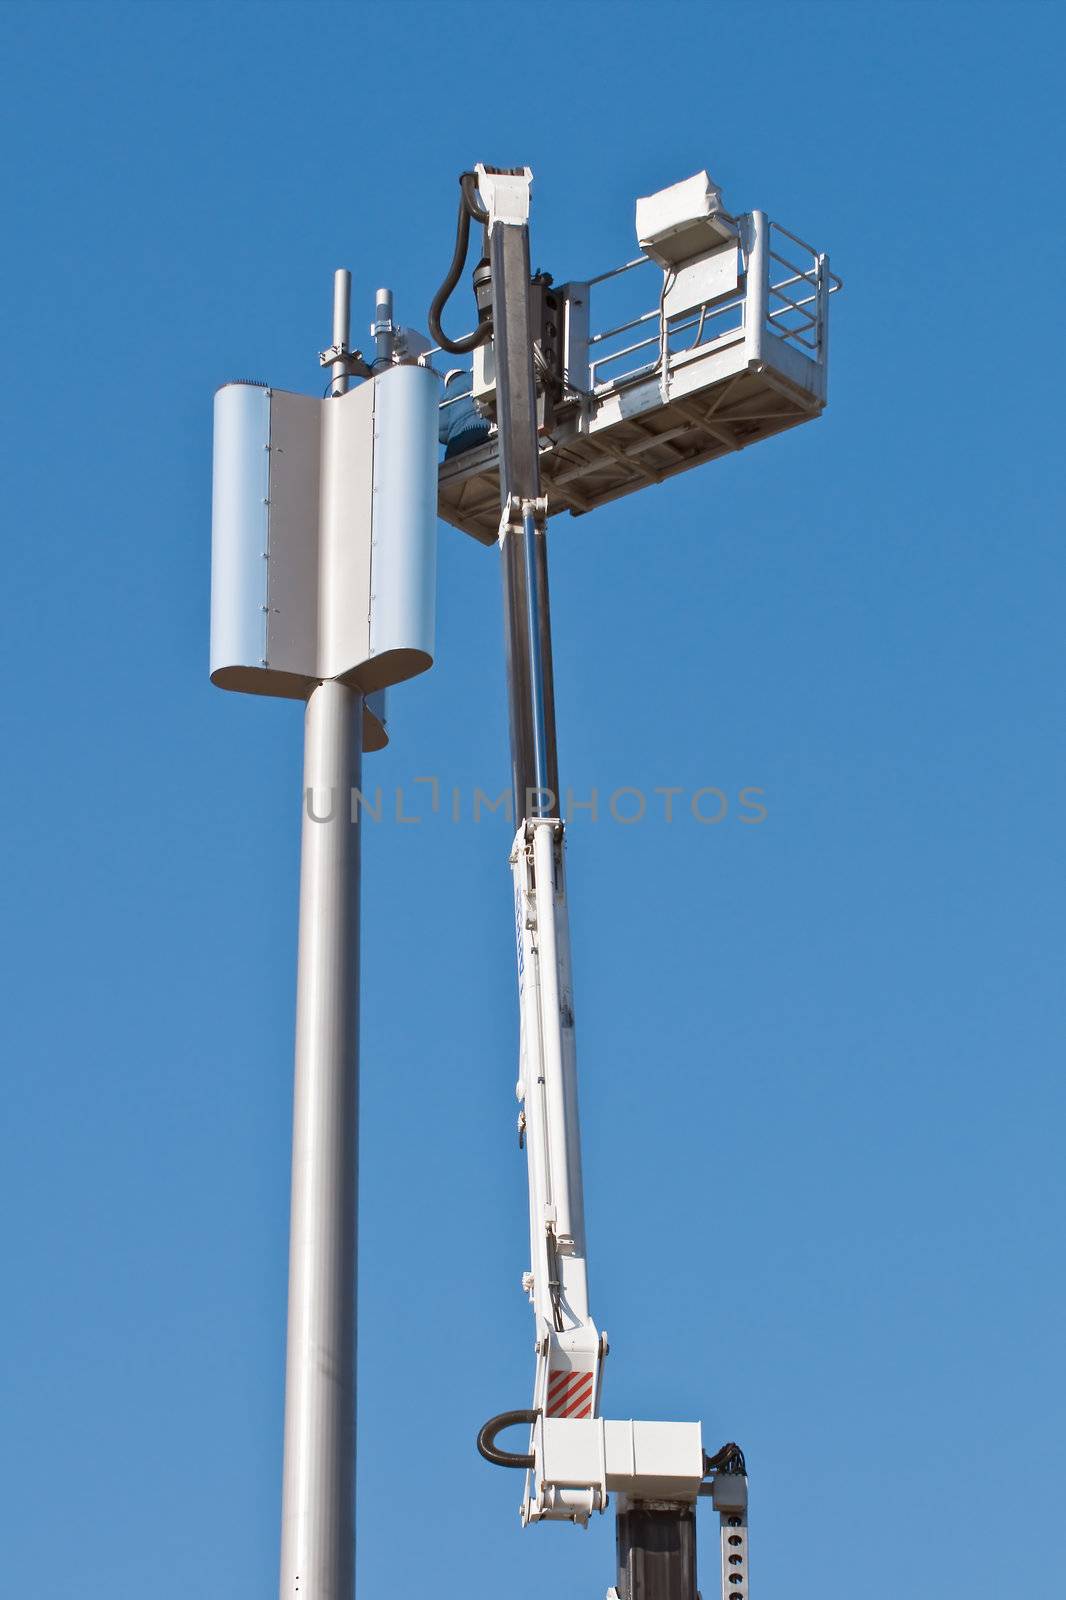 Installation of a GSM antenna with a worker on platform